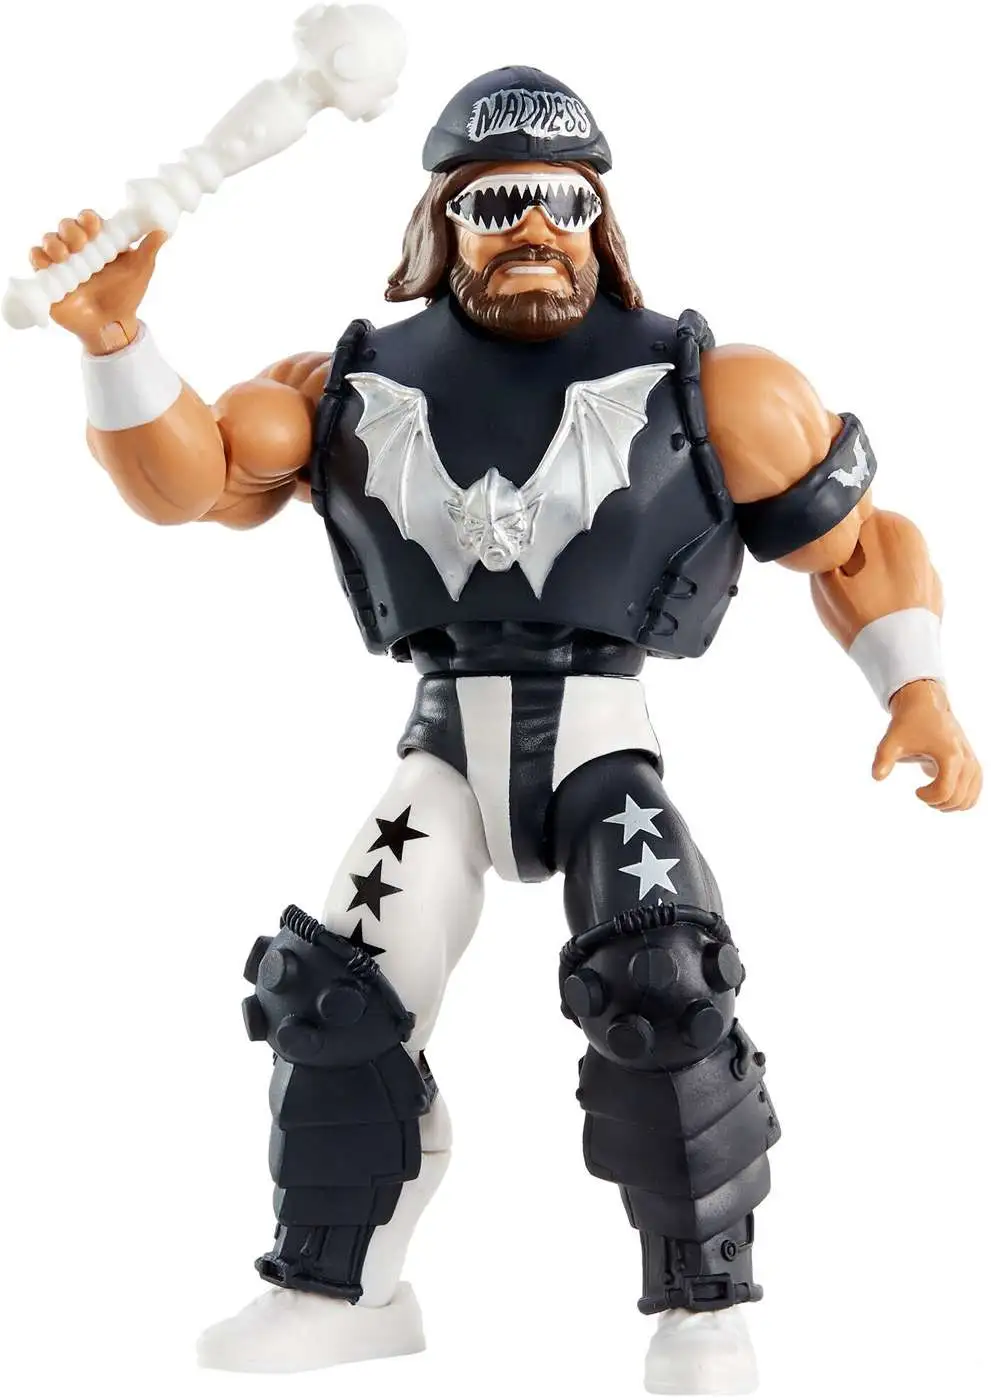 GXR07 for sale online WWE Masters of The Universe Macho Man Randy Savage 5.5 inch Action Figure 